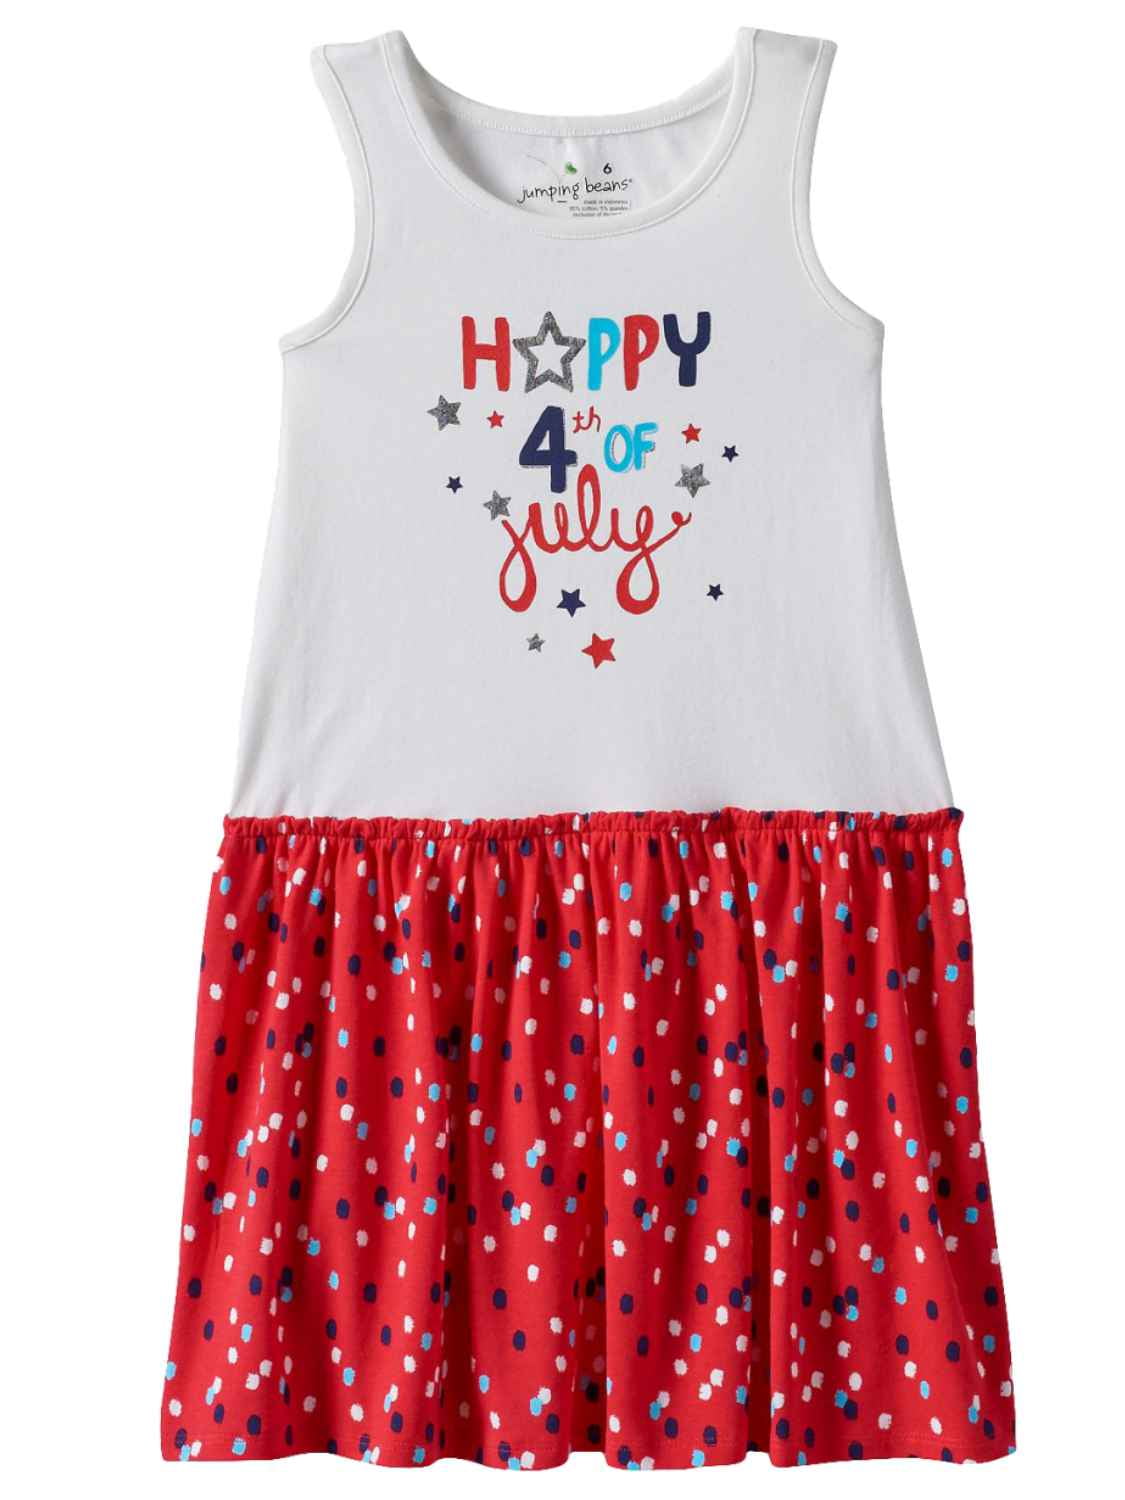 Jumping Beans 4th of July Outfit Red White Blue Top & Jeans or Skirt 6 to 18 Mon 